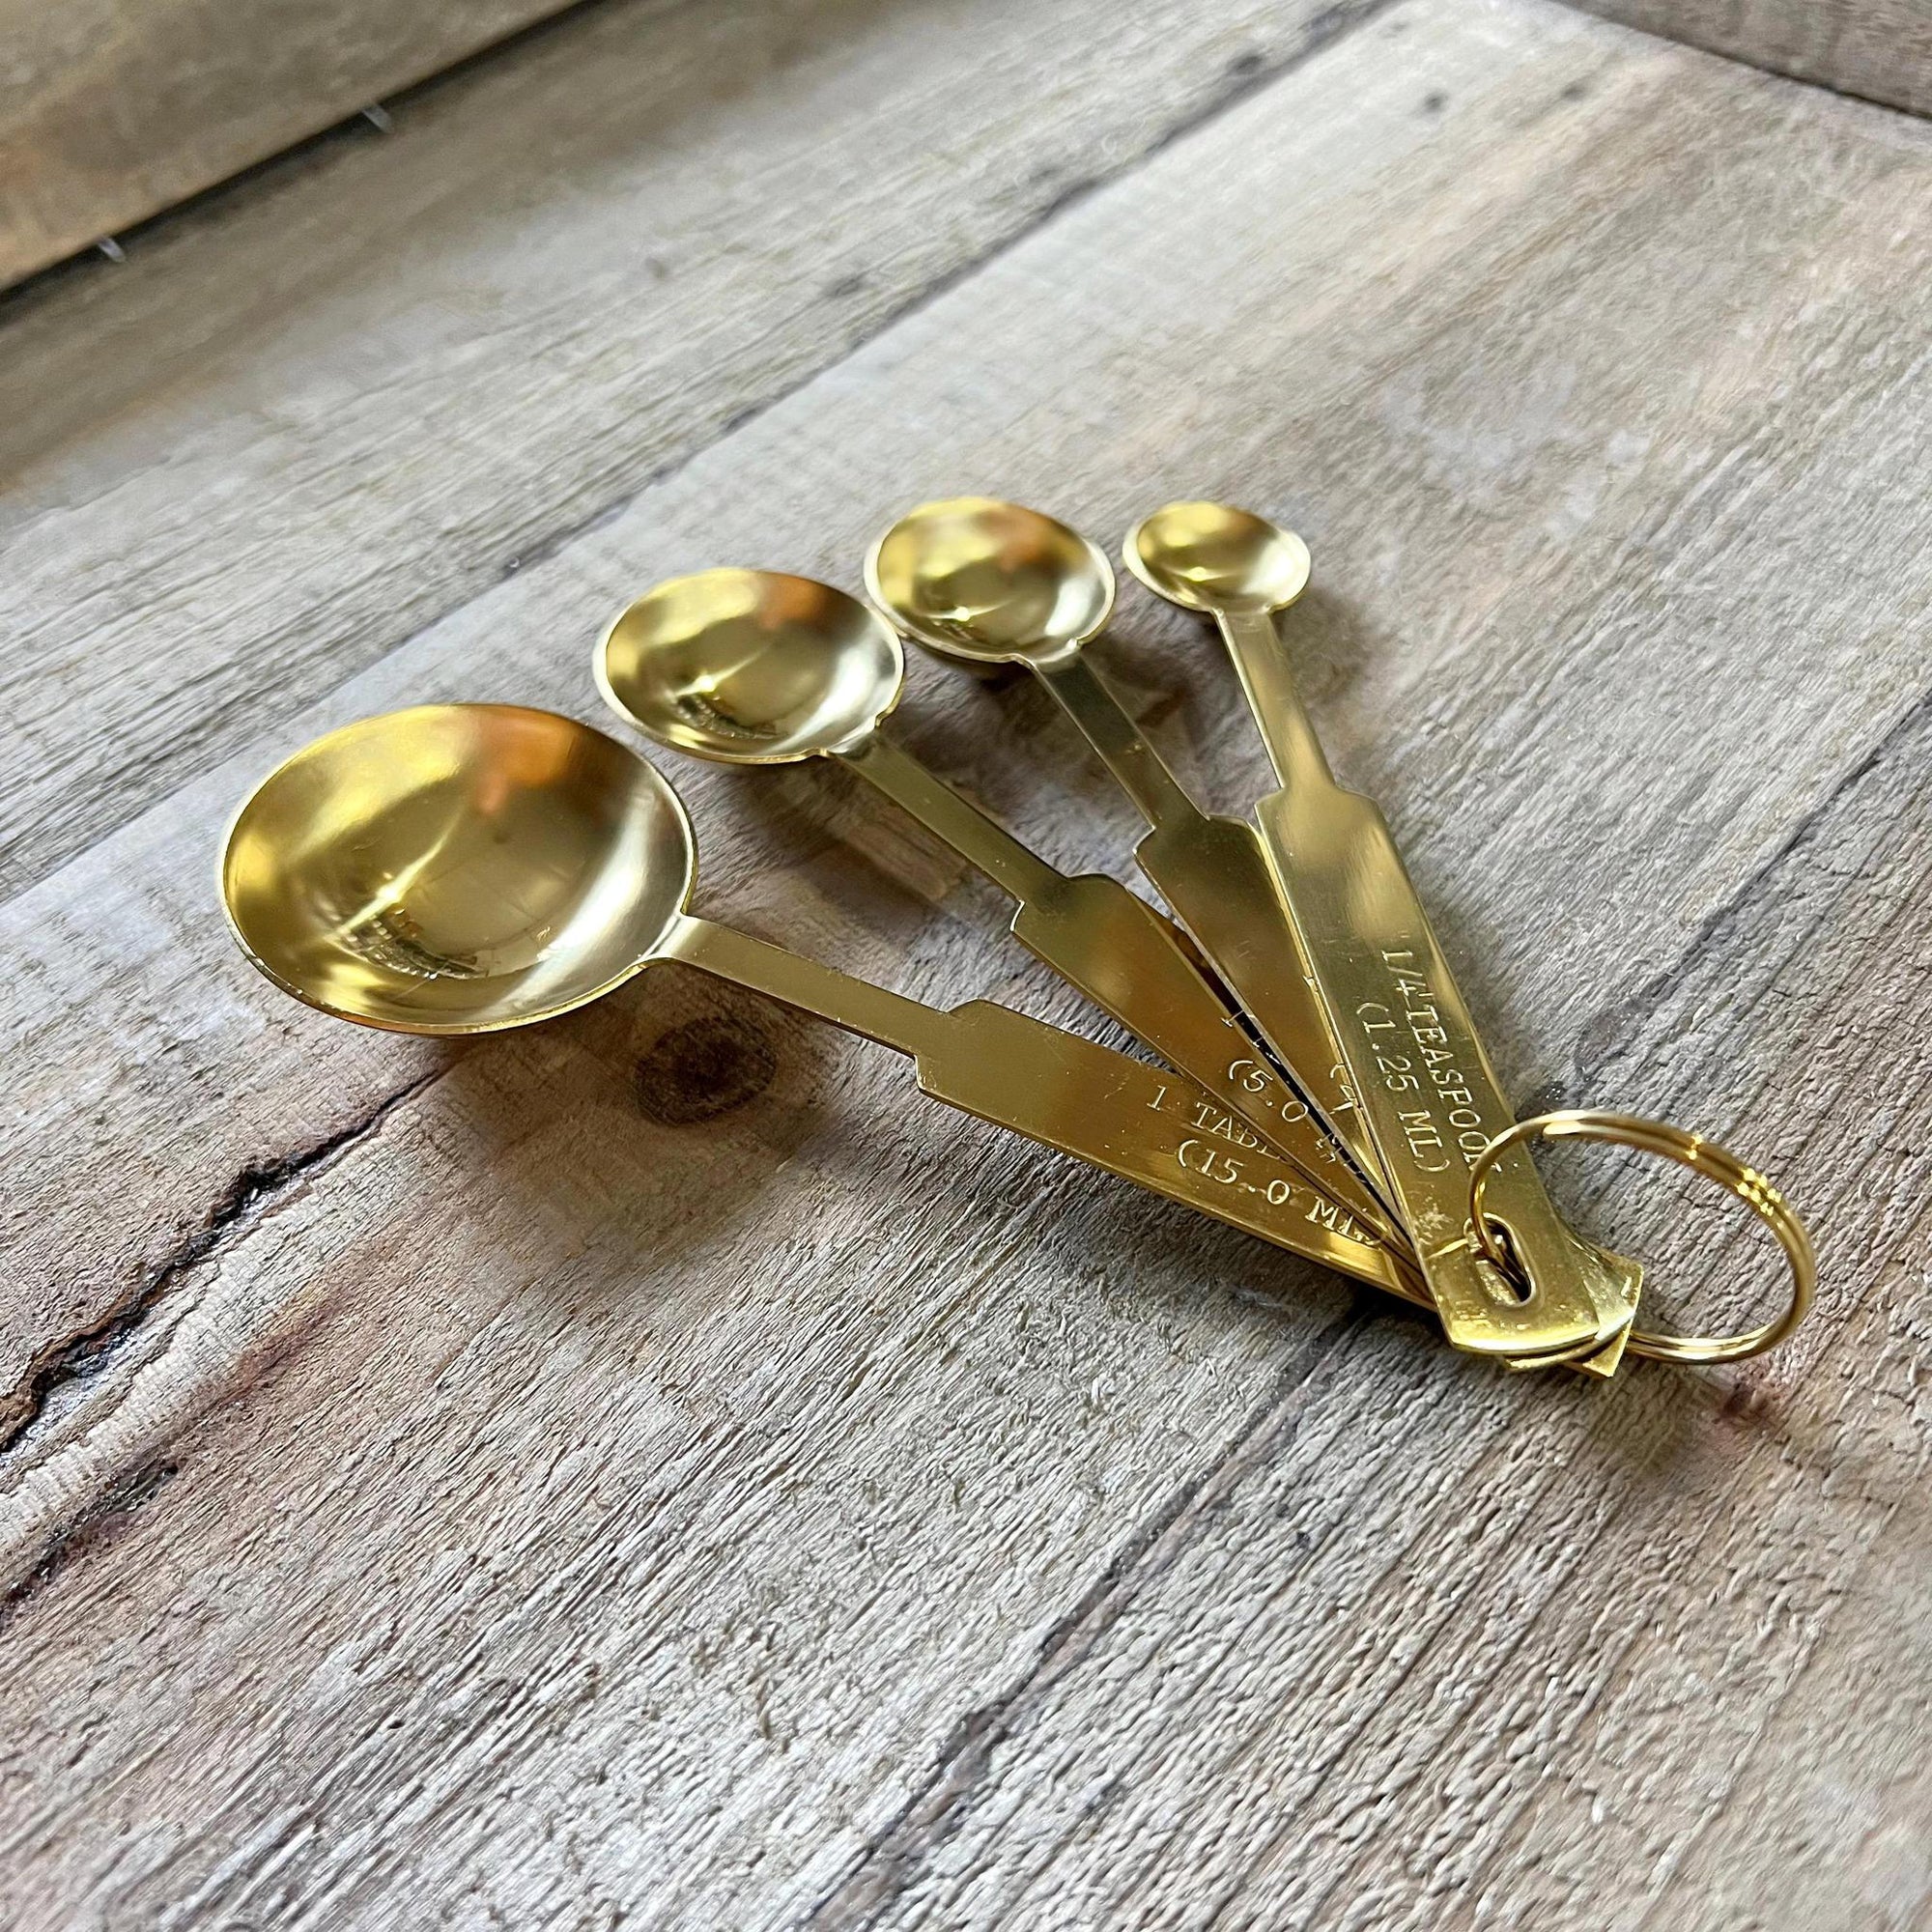 s/4 Stainless Steel Measuring Spoons